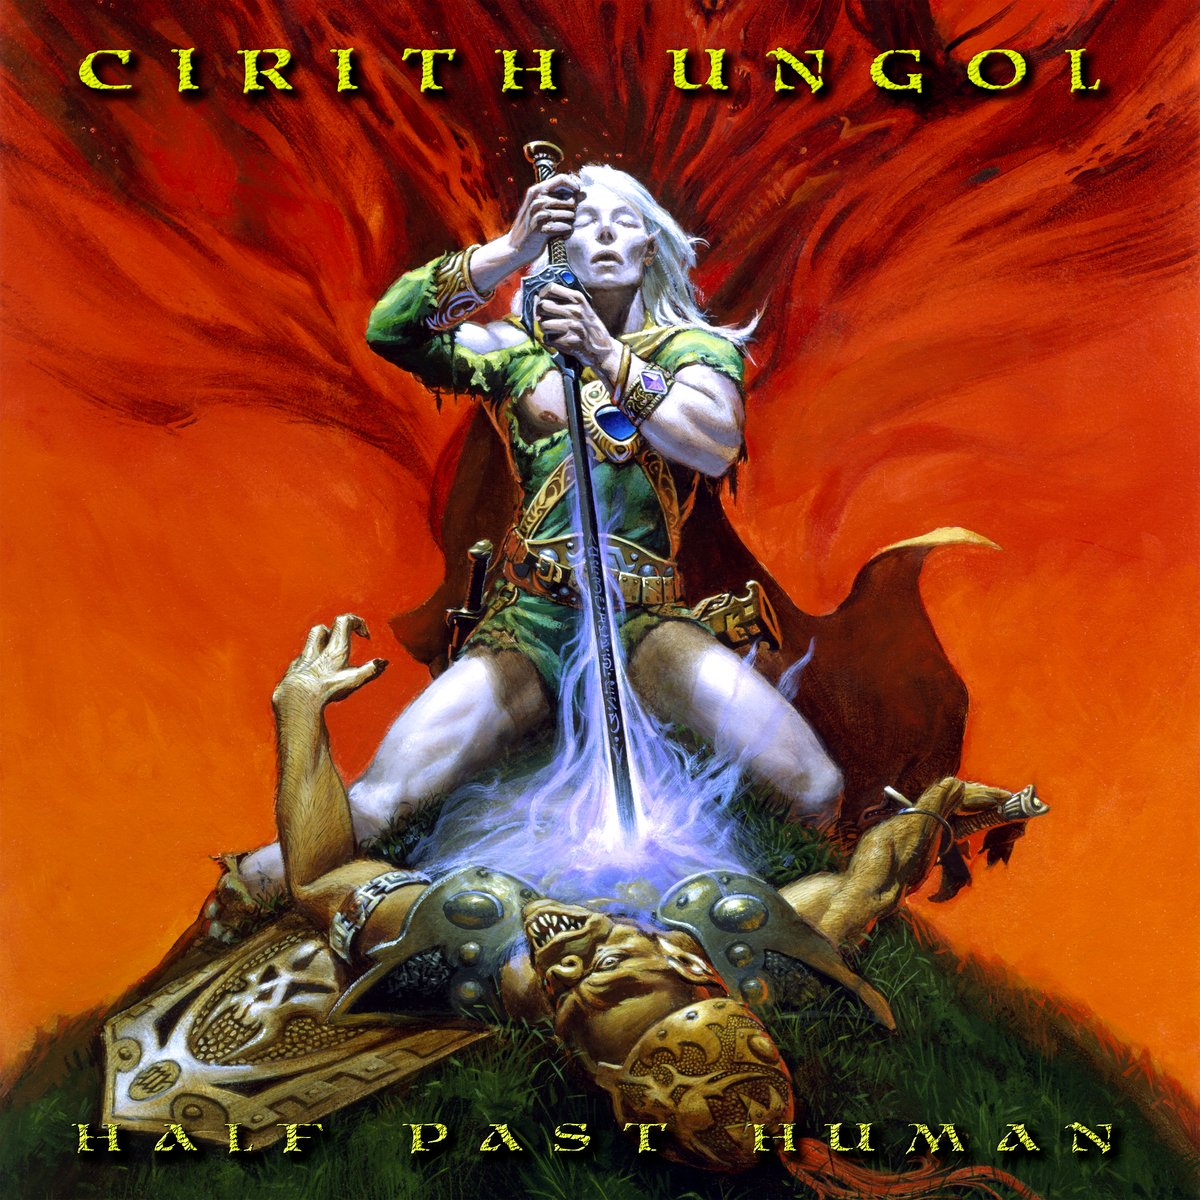 rt metalblade legions dbmagazine is giving you an early listen of the new cirithu ep halfpasthuman now hear this masterp RT @MetalBlade: Legions! @dbmagazine is giving you an early listen of the new @CirithU EP, #HalfPastHuman NOW! Hear this masterp... | Cirith Ungol Online